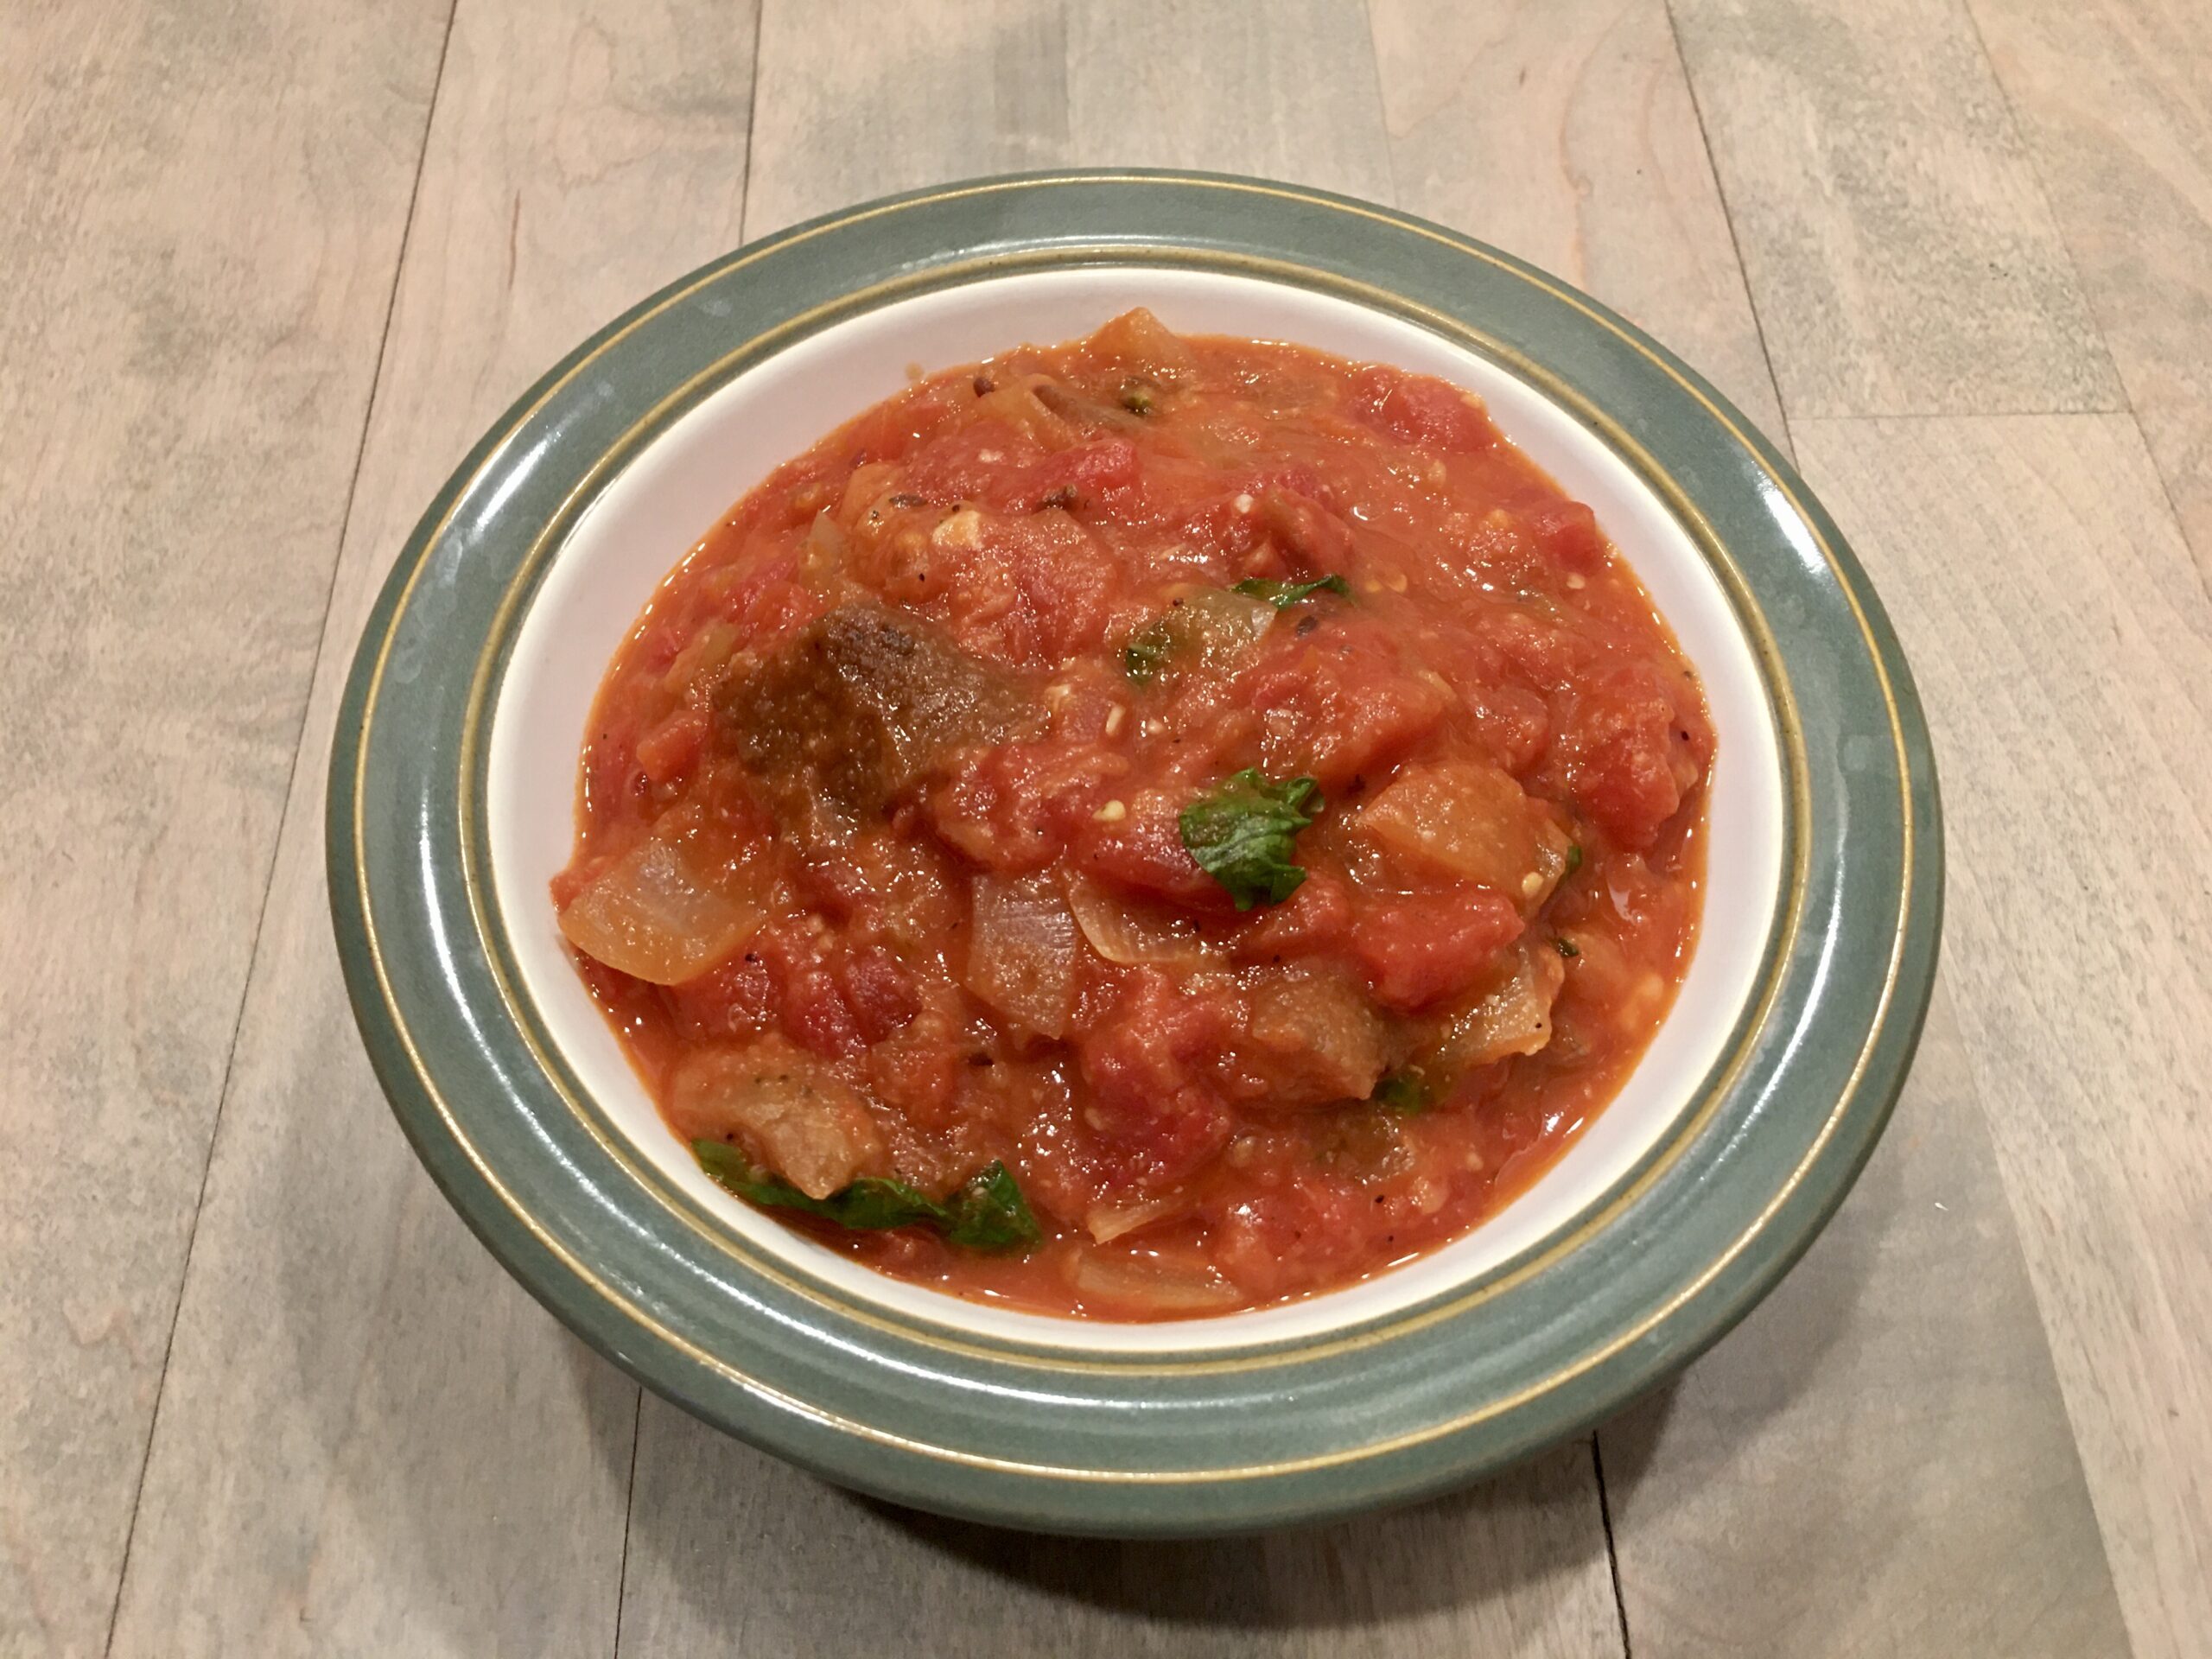 Tomato and Bread Soup served in green bowl